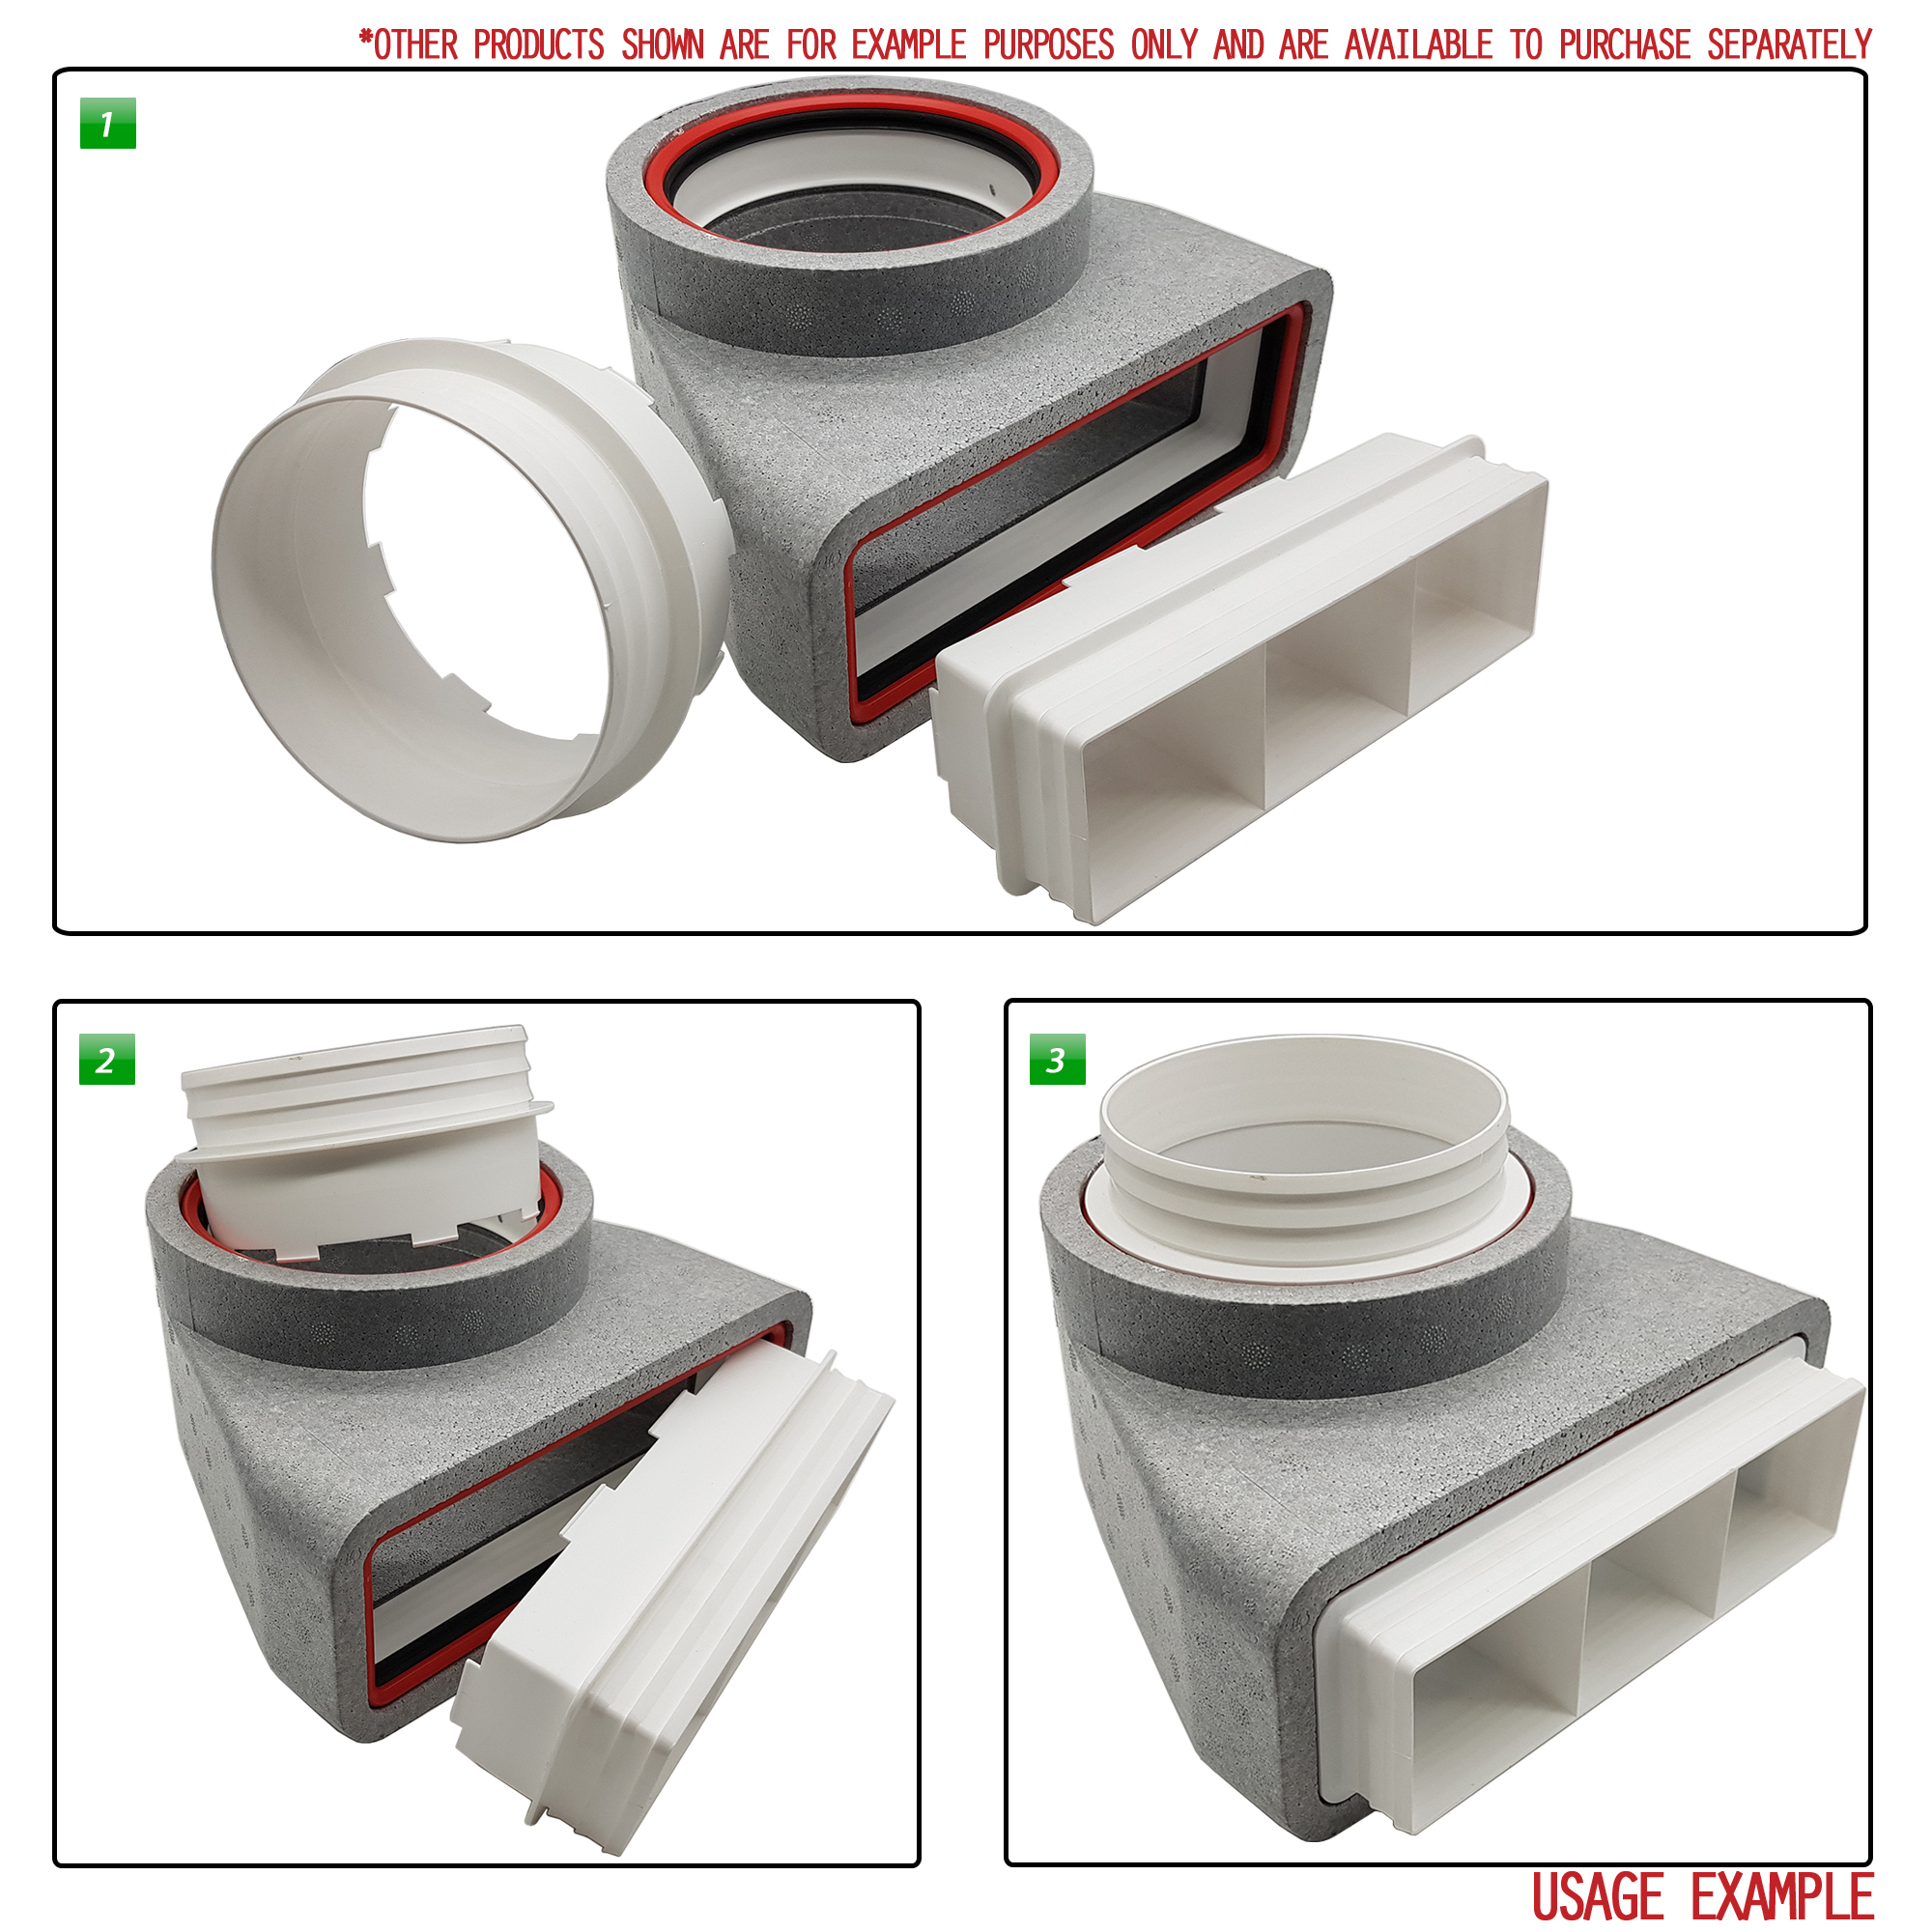 Kair Self-Seal Thermal 204X60mm Male Duct To Fitting Click And Lock Connector